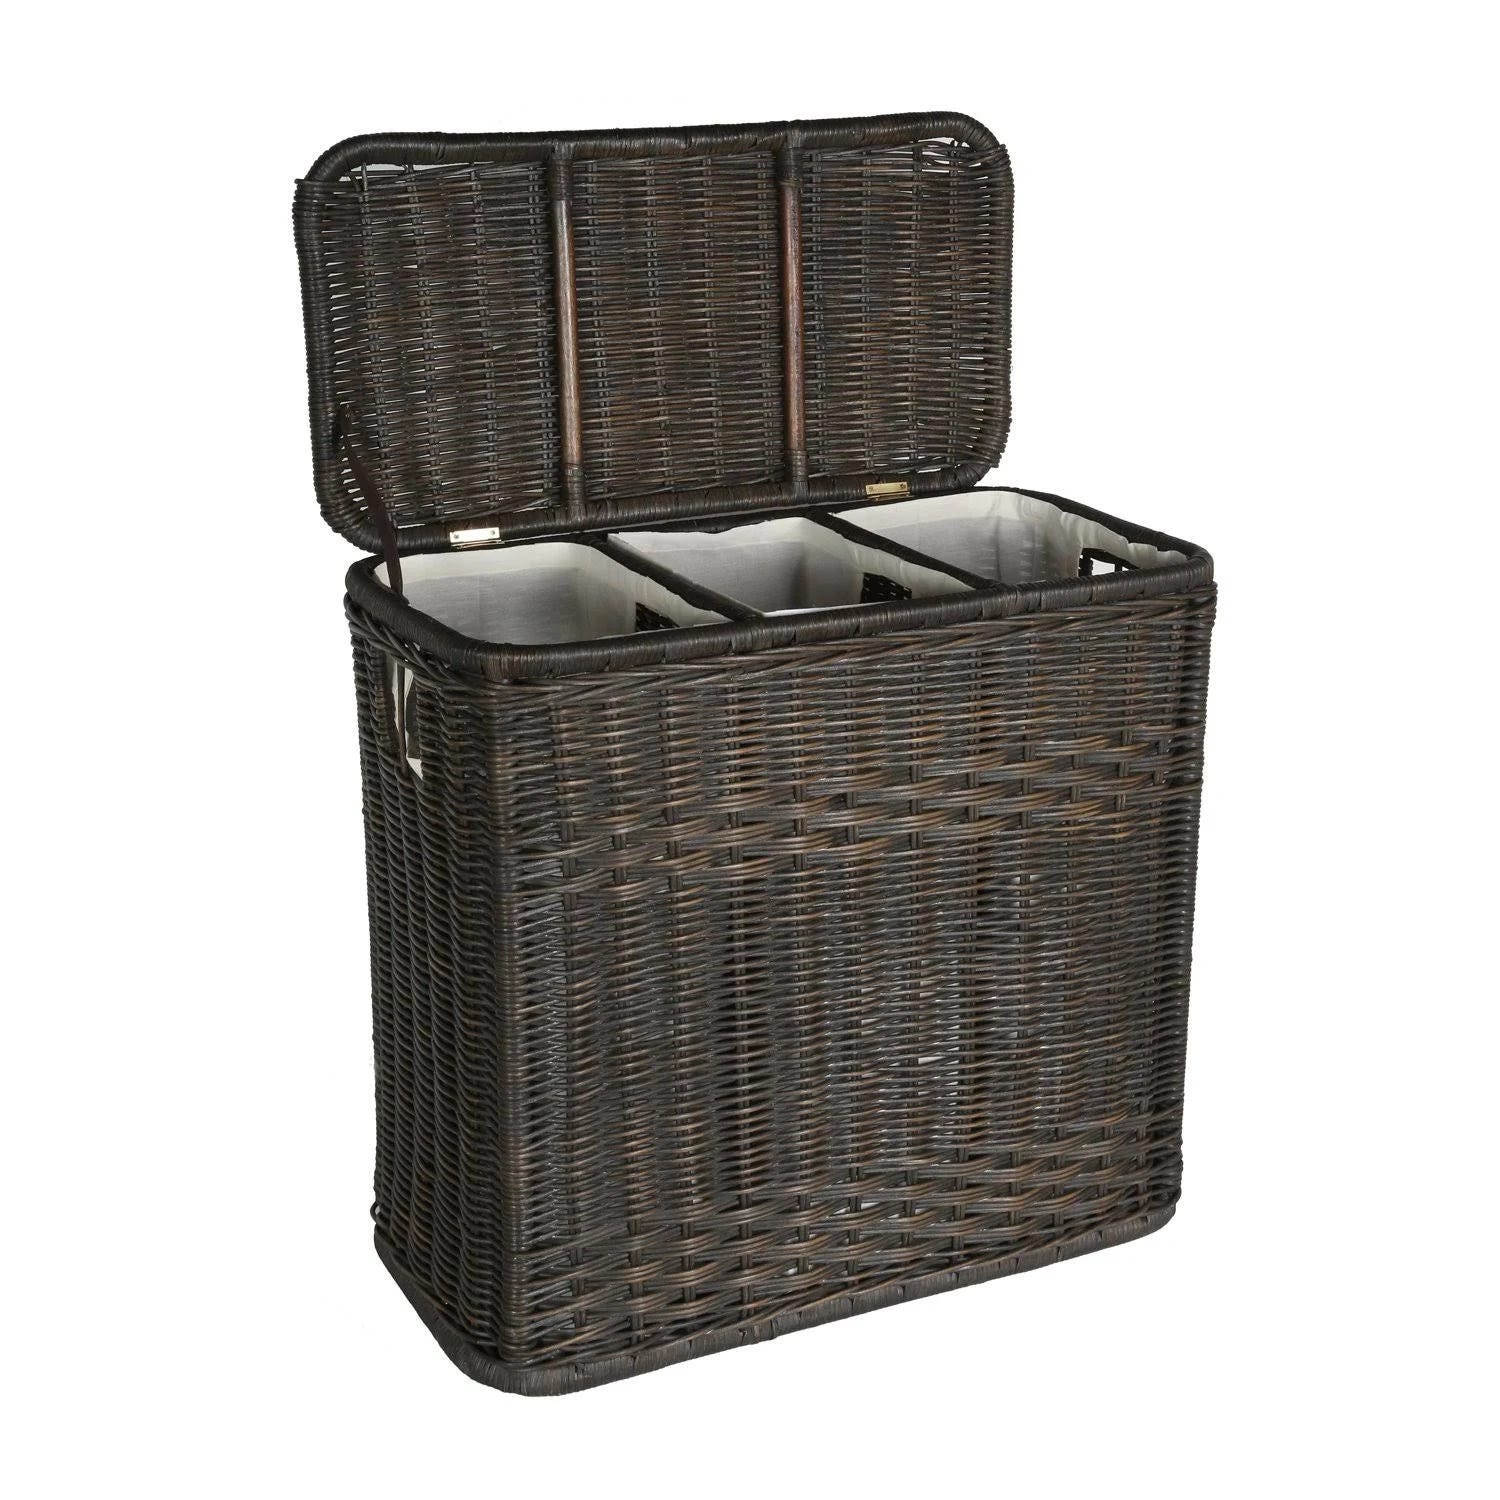 Divided 3-Compartment Wicker Laundry Hamper | Image